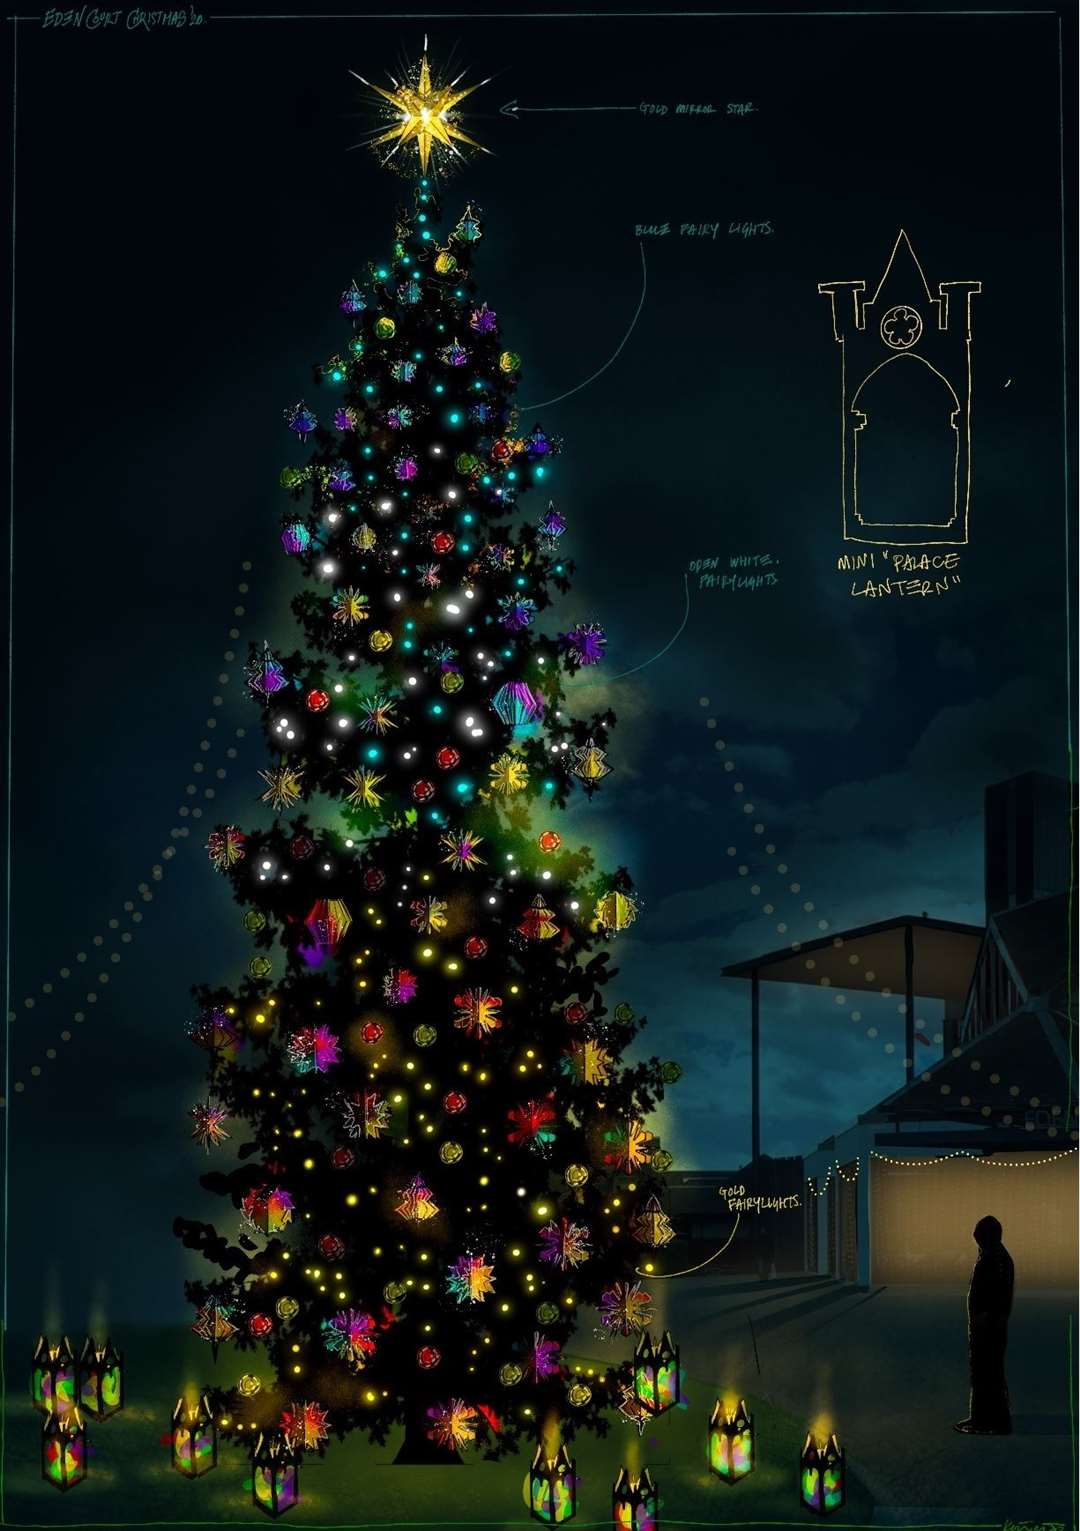 An artist's impression of the tree.